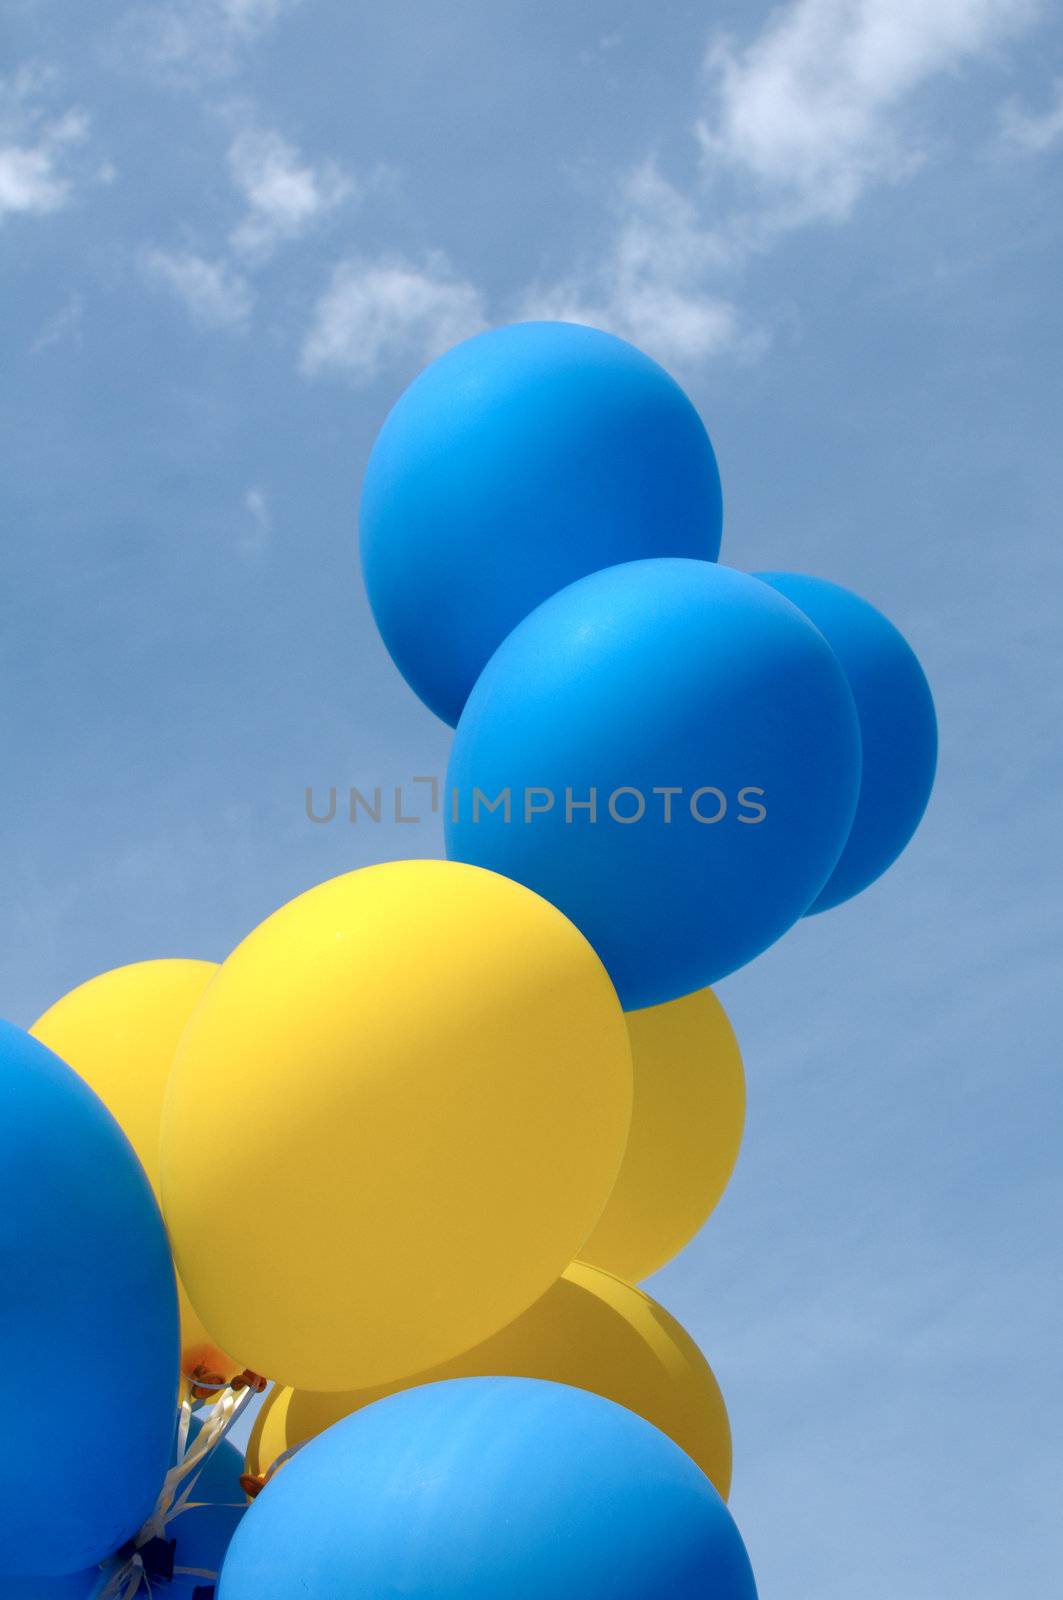 multicolored balloons in the city festival